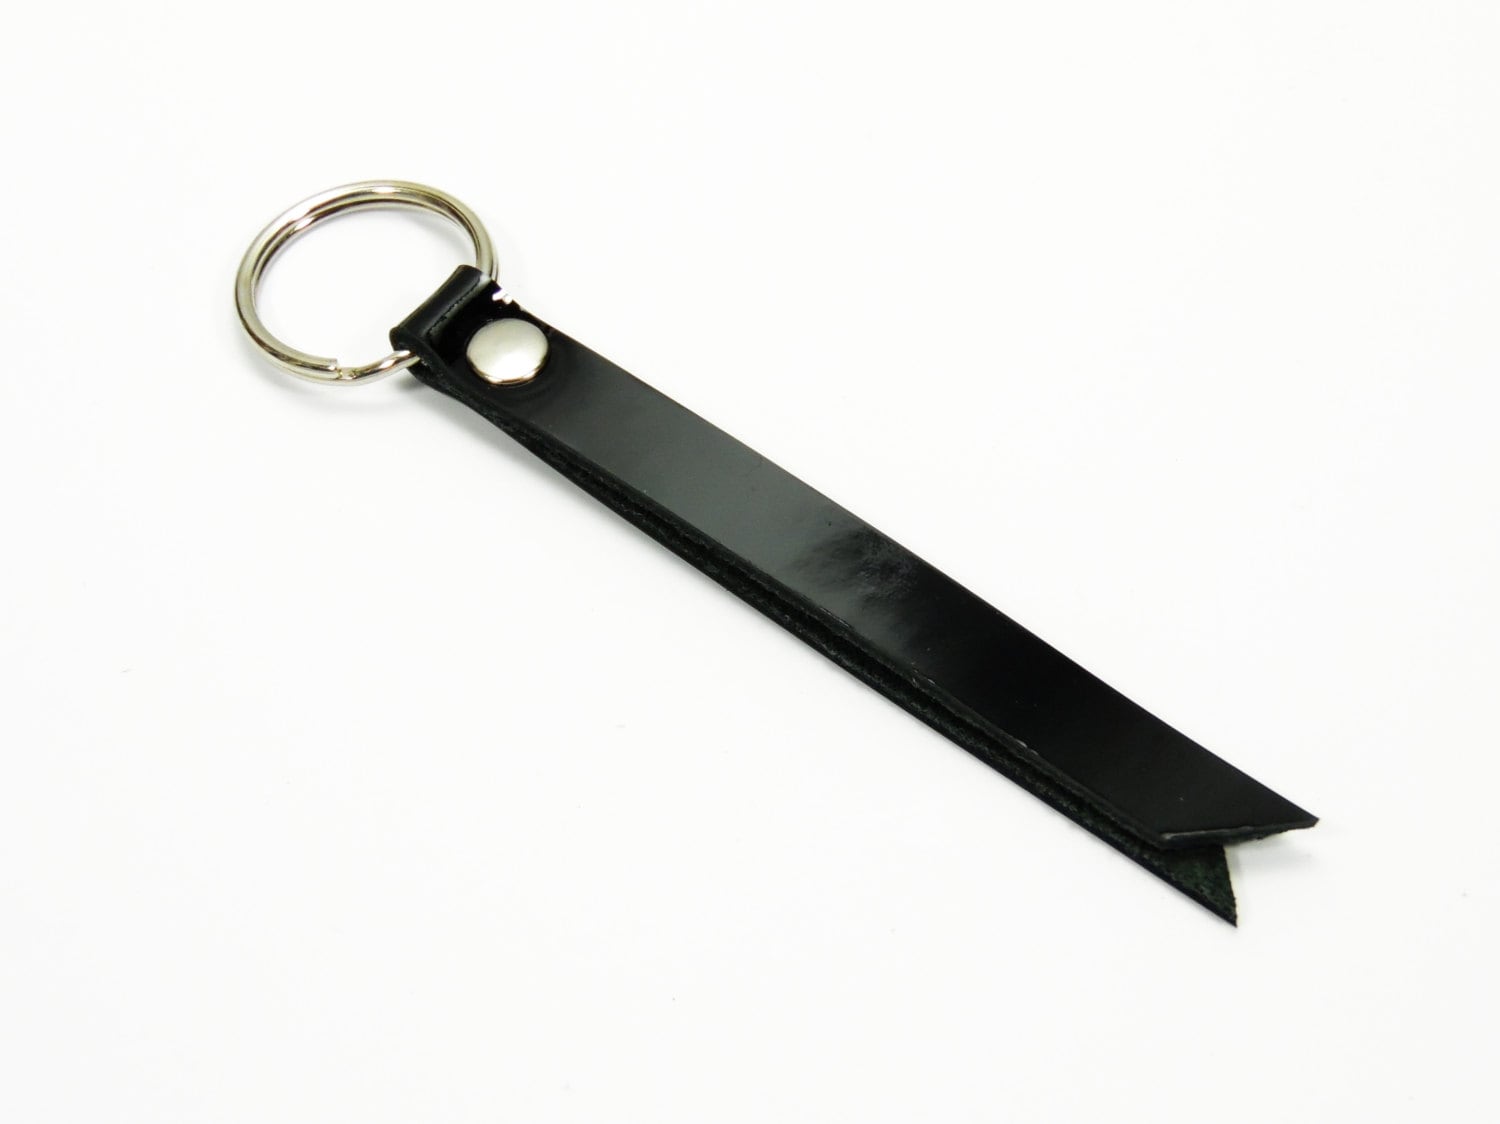 Patent Leather Key Fob, Leather Keyring, Leather Keychain, Leather Key  Holder - 3 Key chain wrist strap in Black Patent Leather